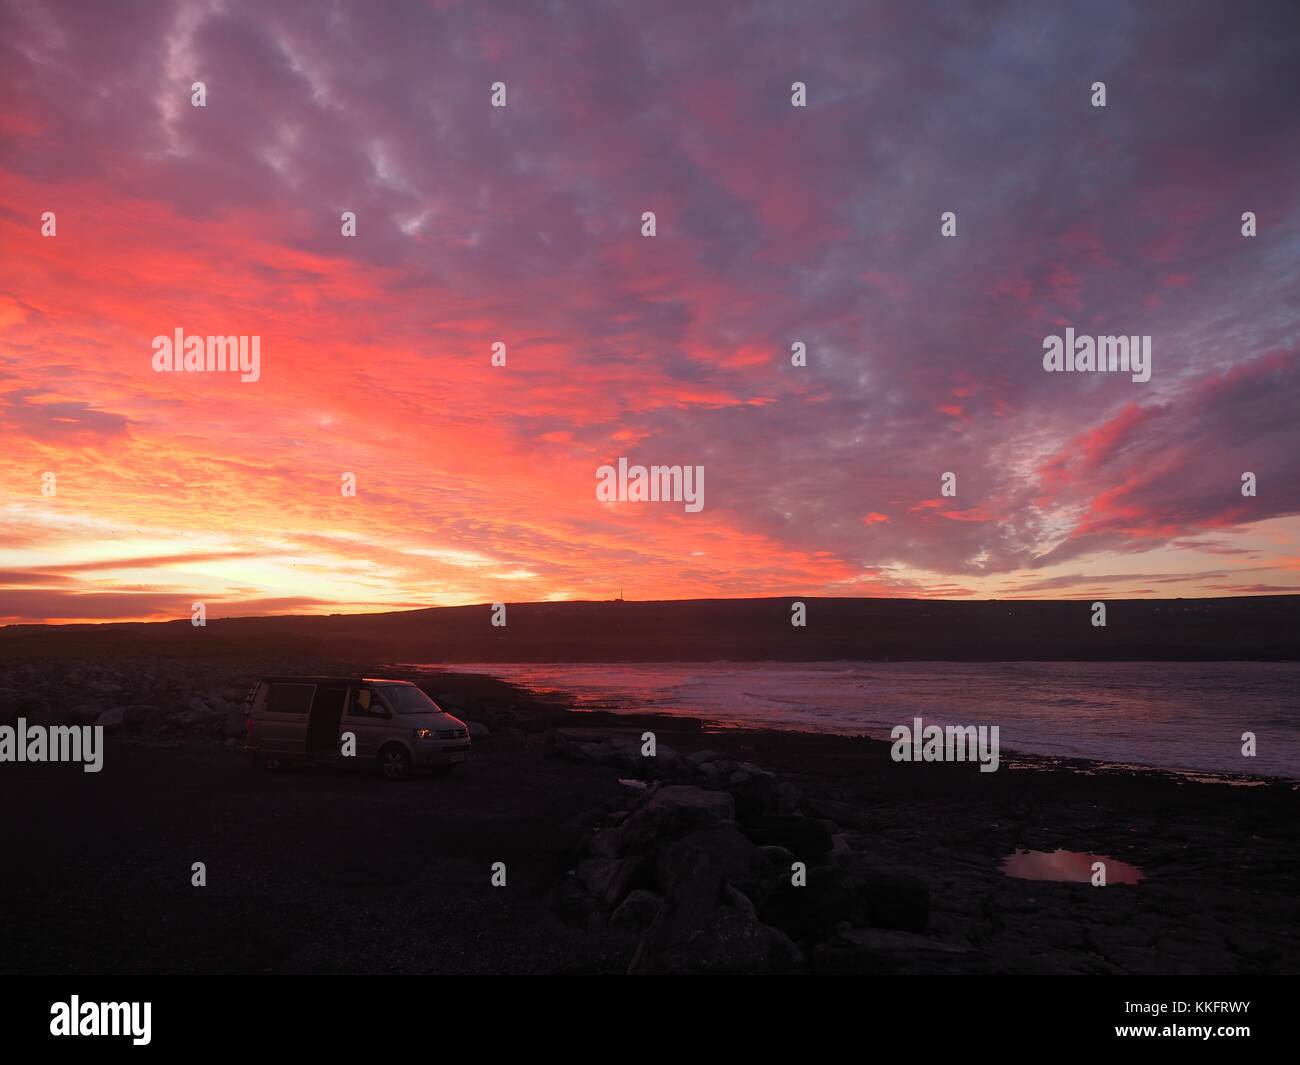 The sun rises over the Wild Atlantic Way at Doolin Pier, County Clare, Ireland turning the rock pools a sunburst red. Stock Photo